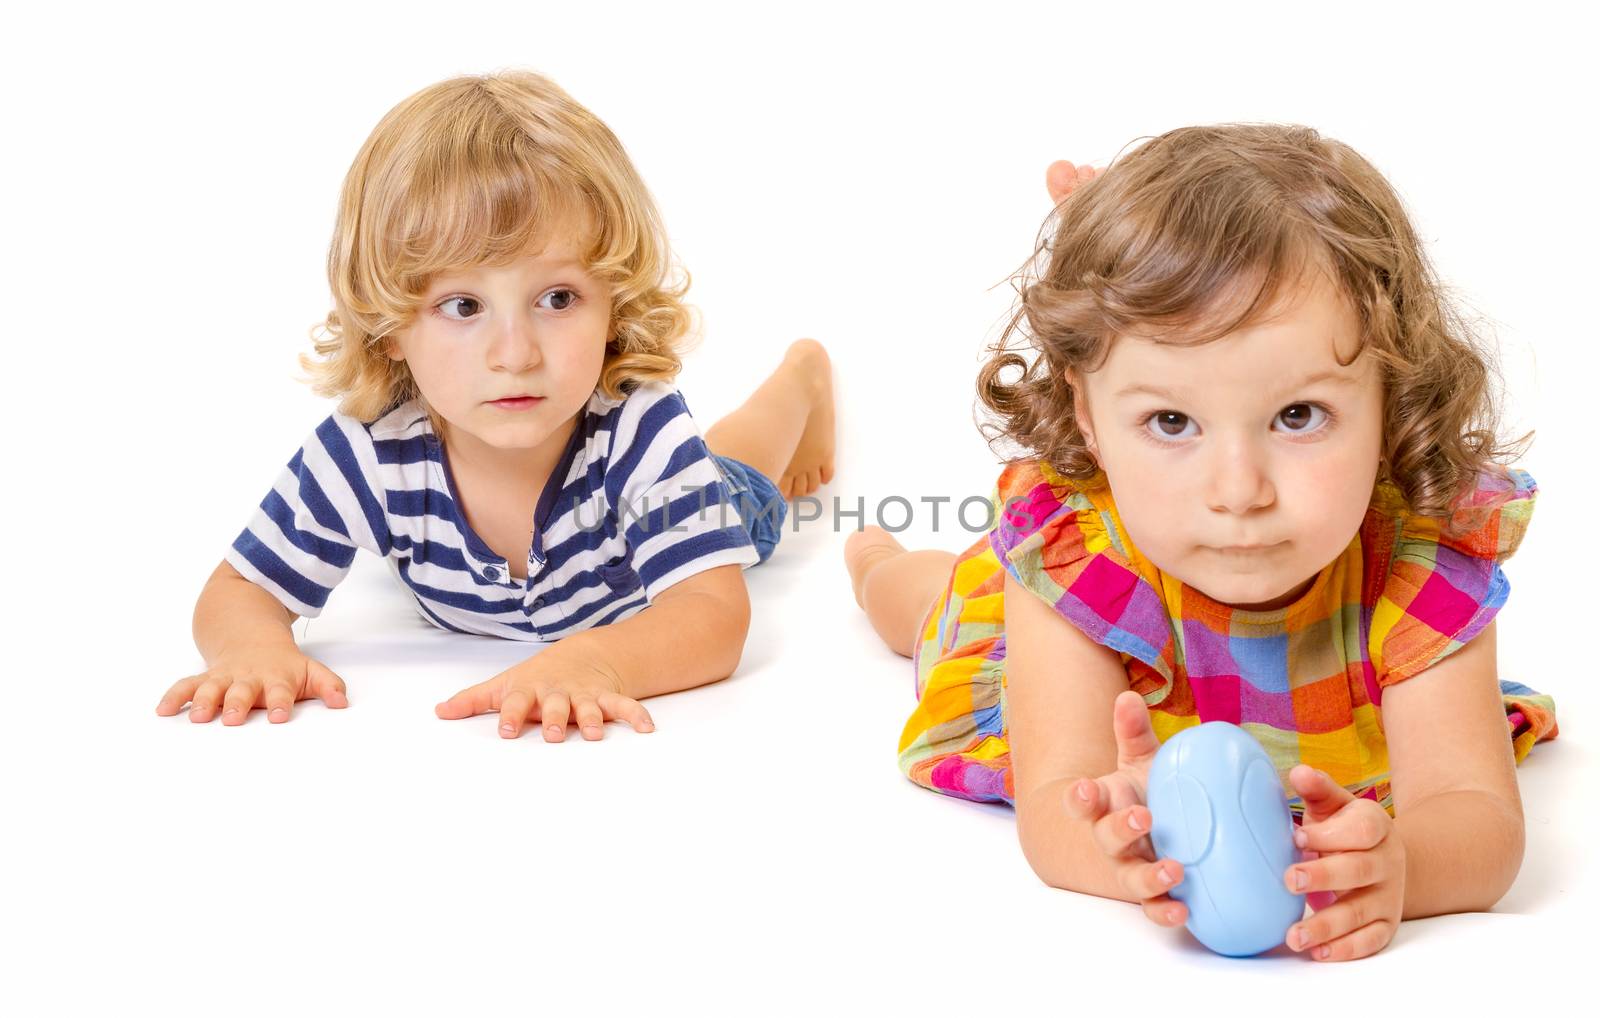 Funny boy and girl are lying together isolated on white background. Focus on little boy.